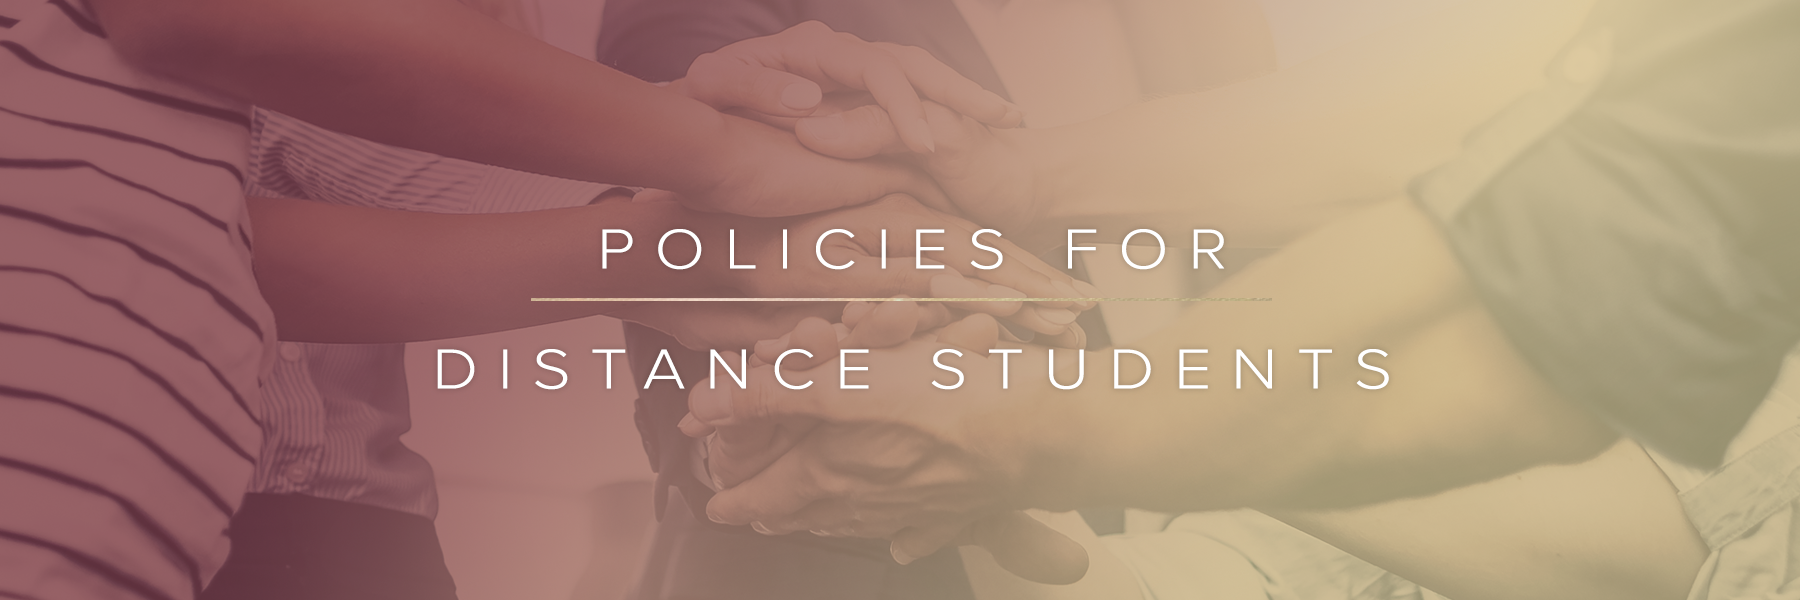 Policies for Distance Students